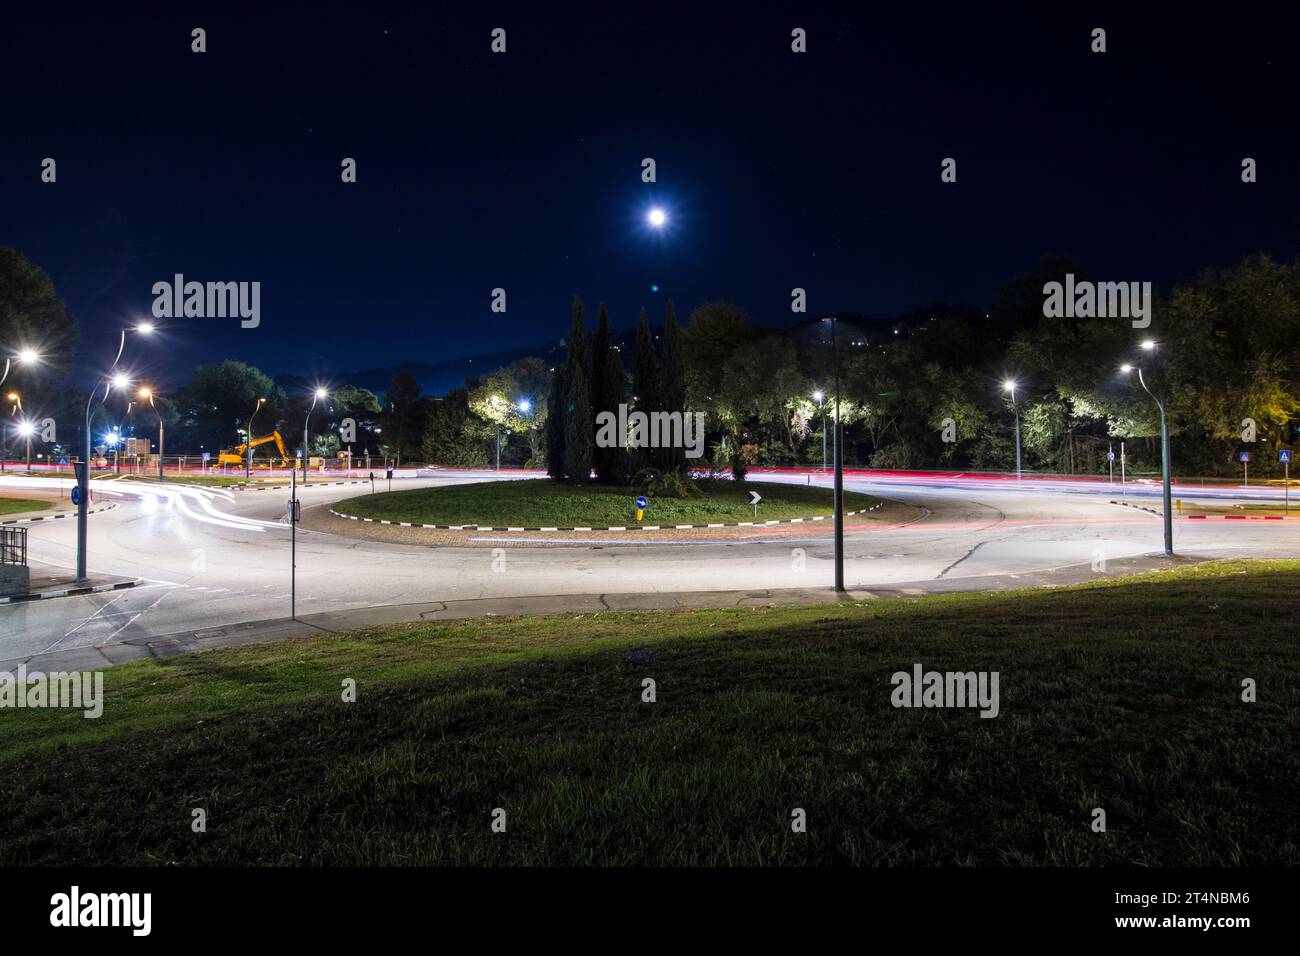 Roundabout in a fast road in an Italian city at night, with some car lights in both directions. Stock Photo